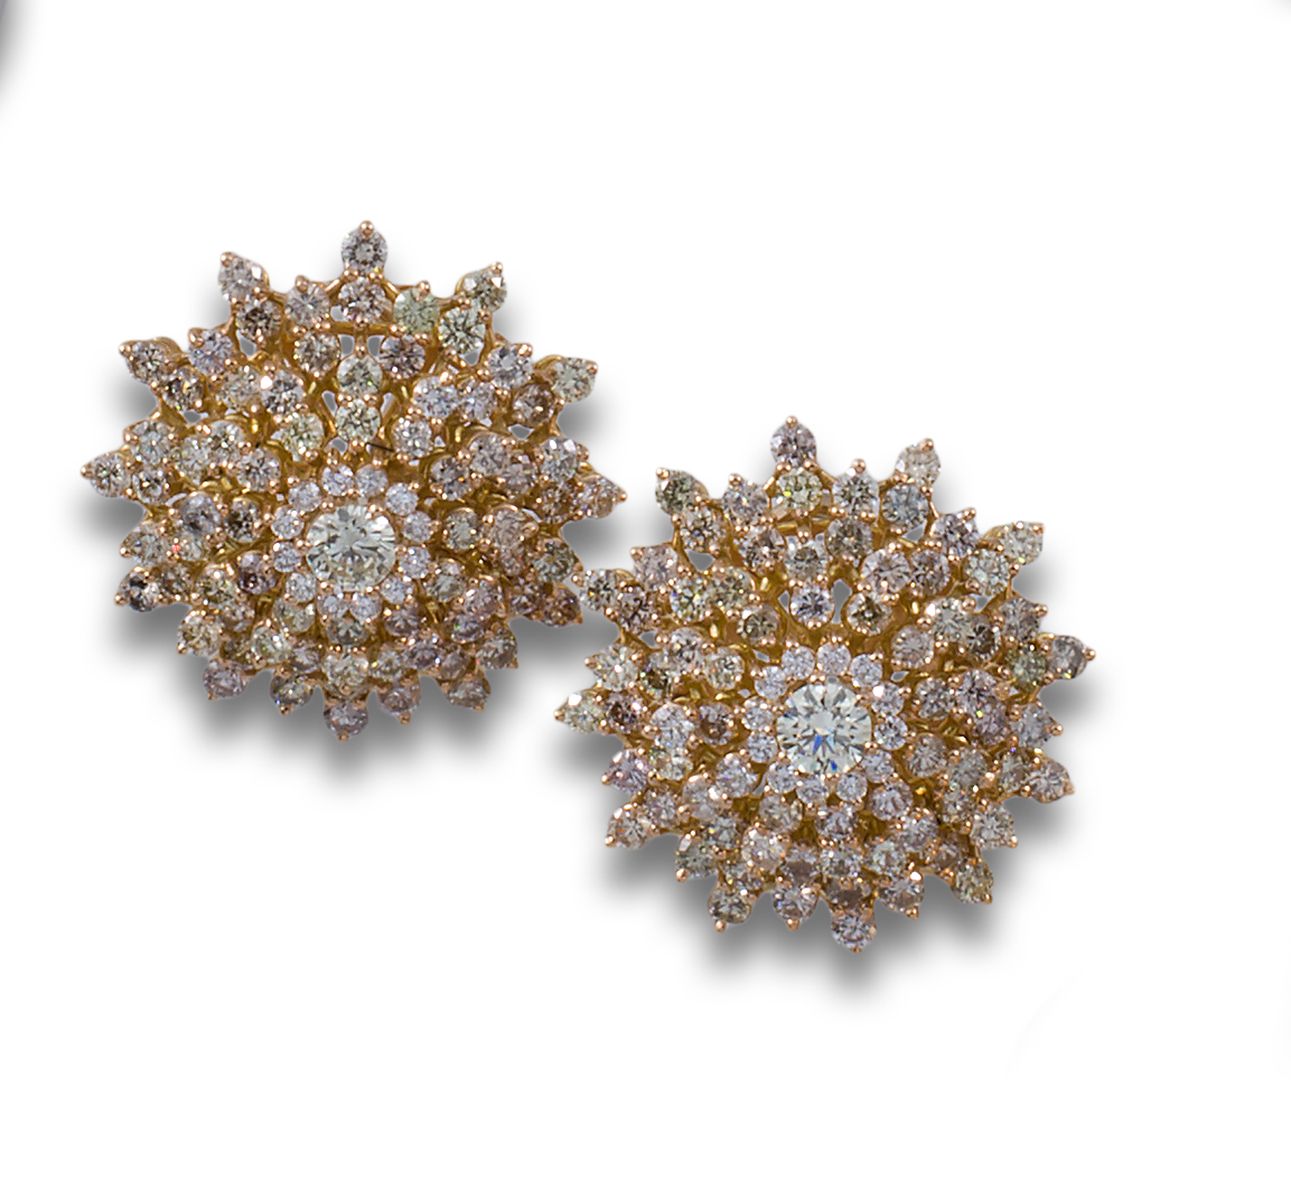 ROSETTE EARRINGS IN YELLOW GOLD AND DIAMONDS 18kt yellow gold rosette earrings s&hellip;